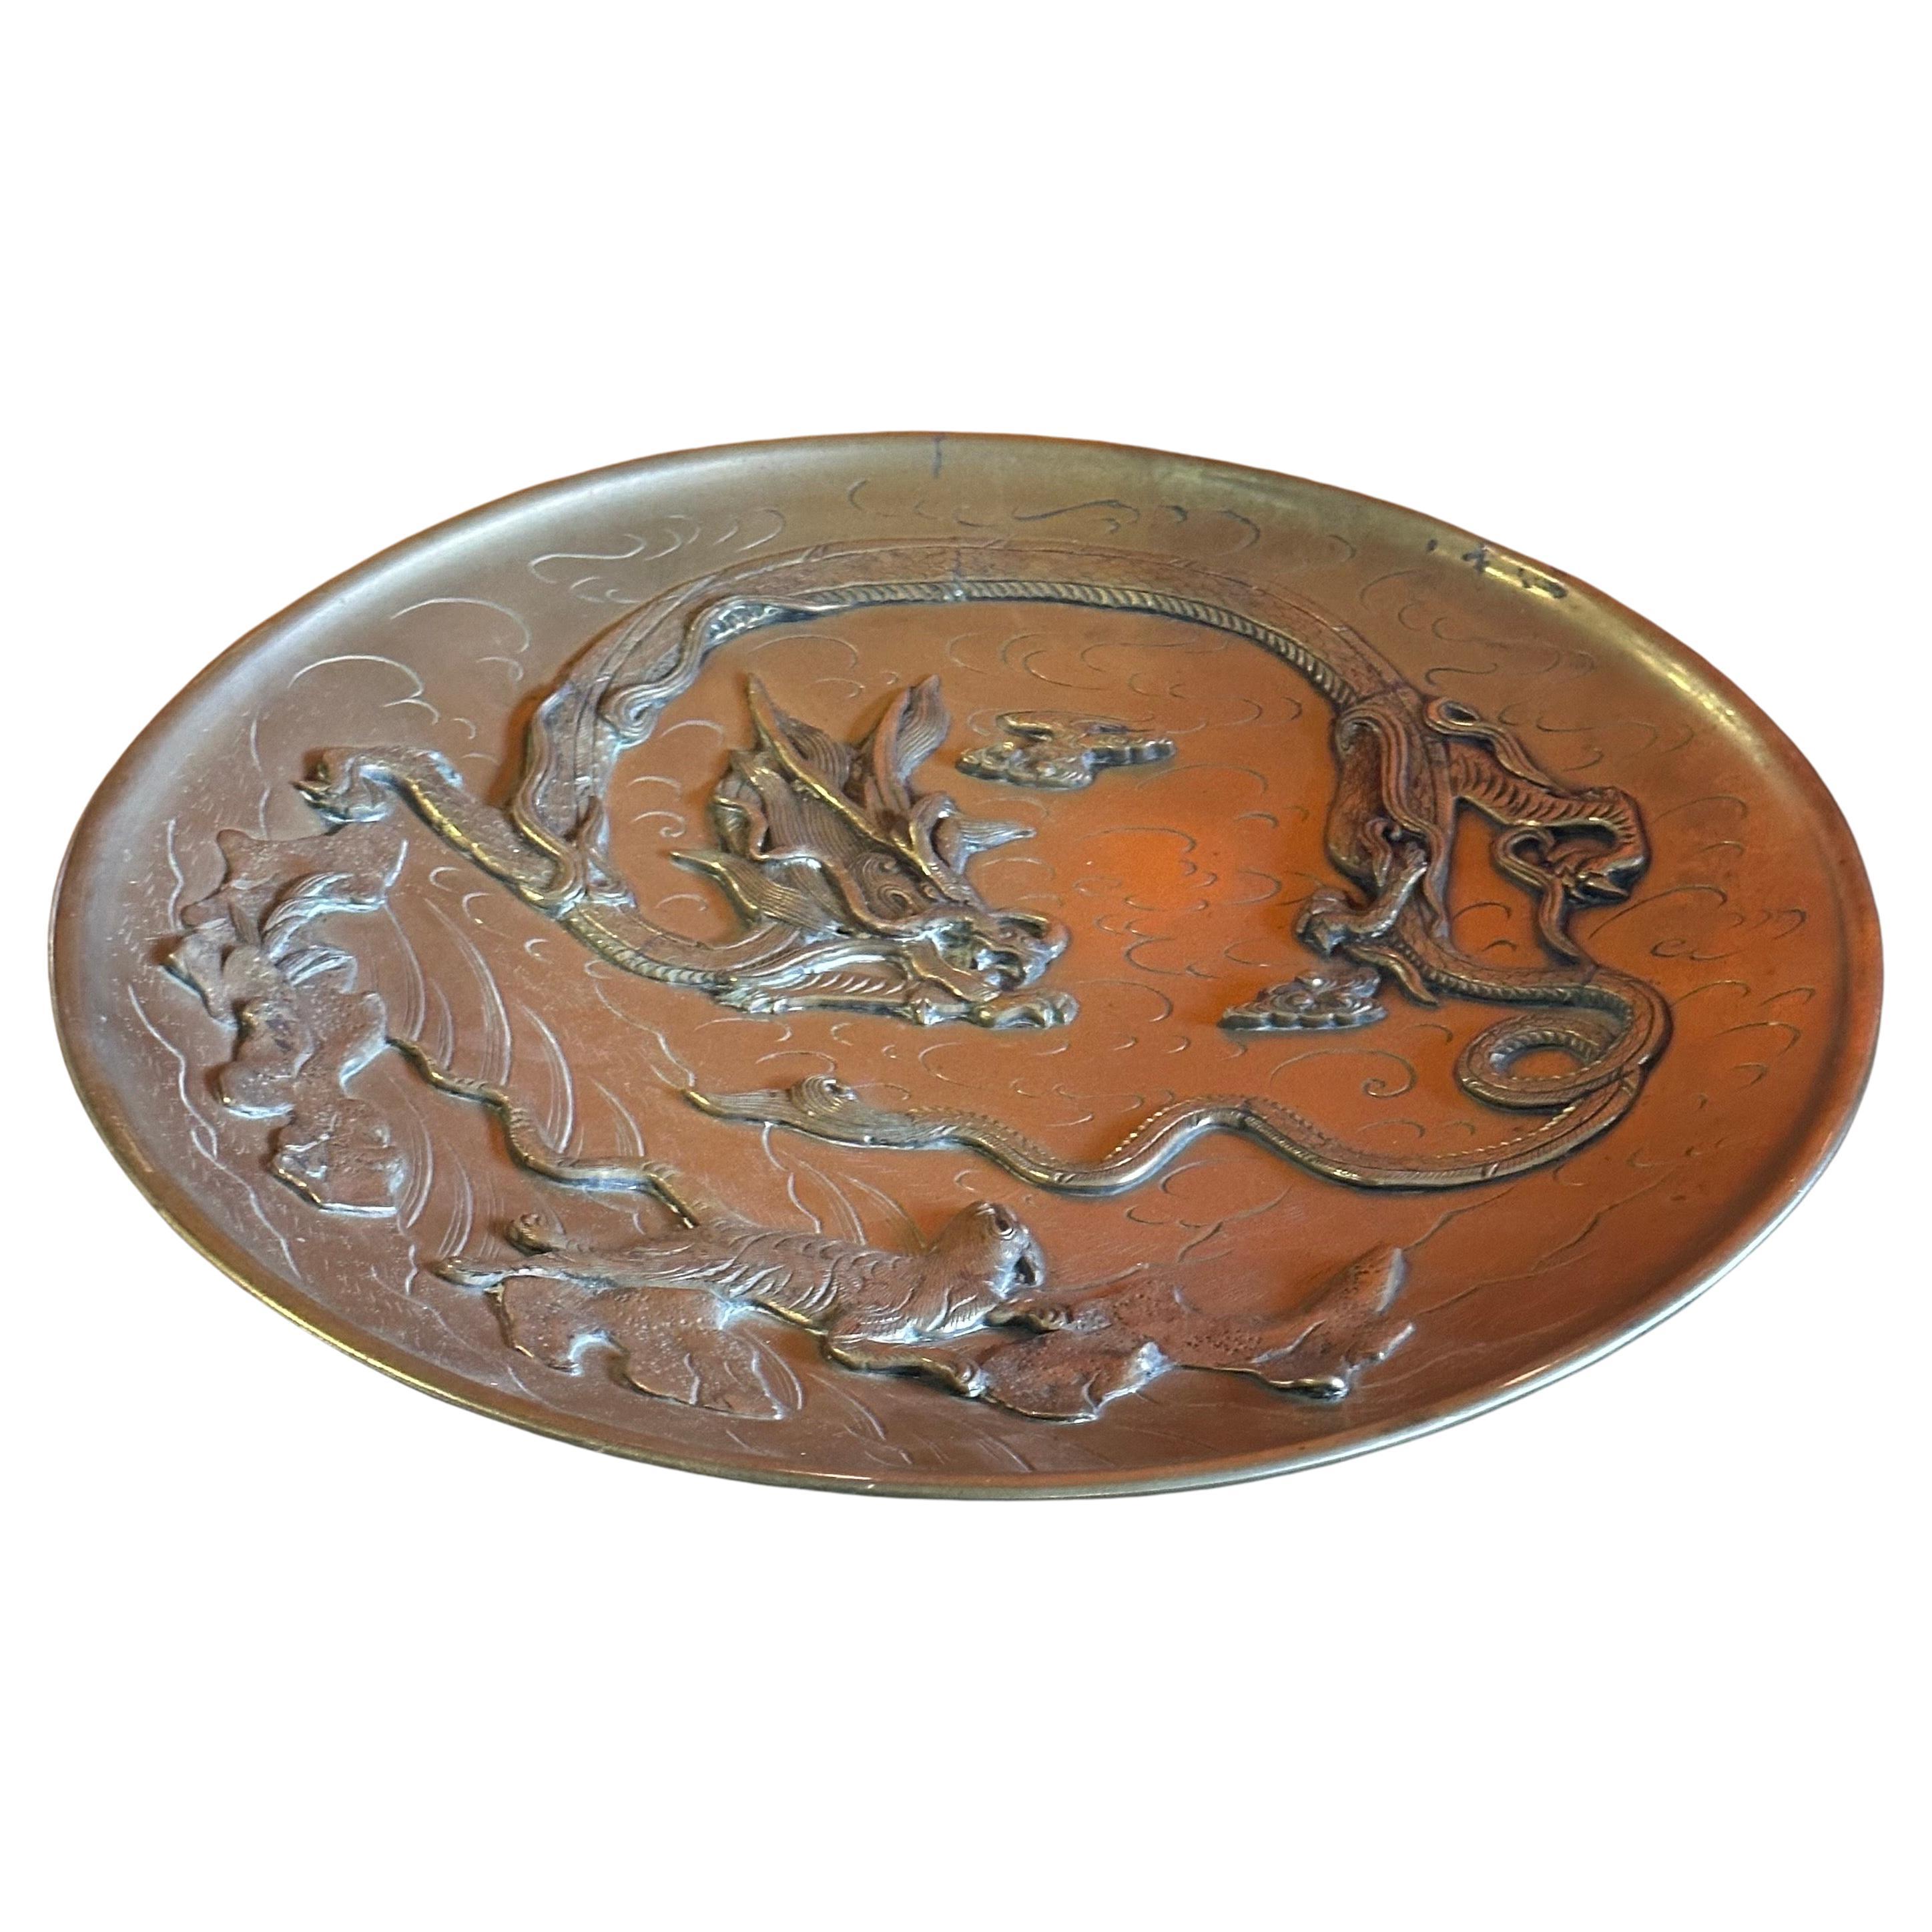 Superb vintage Chinese brass bas-relief dragon charger, circa 1940s.  The piece is in very good vintage condition and measures a hefty 14